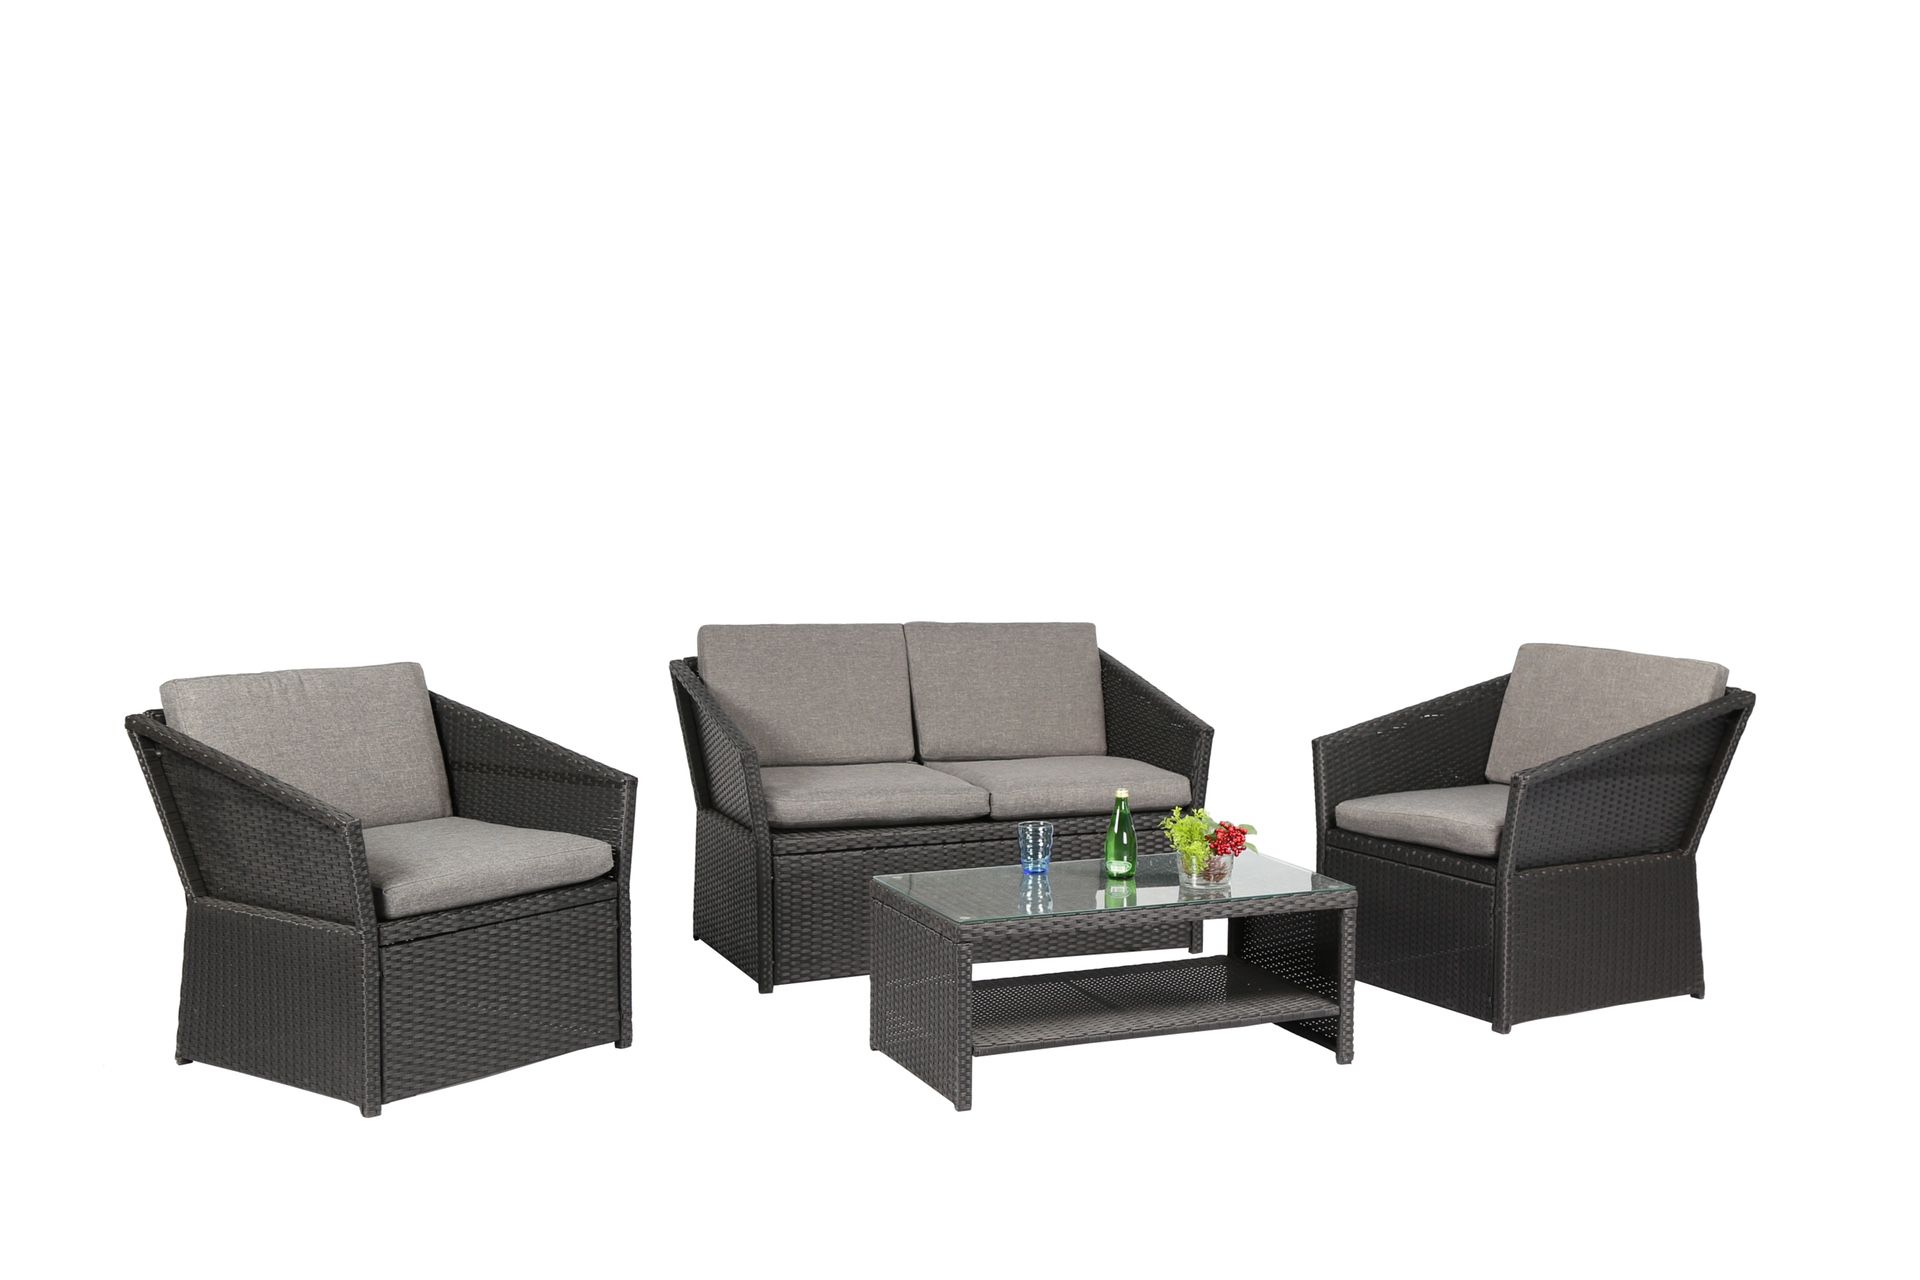 Outdoor patio furniture BRAND NEW